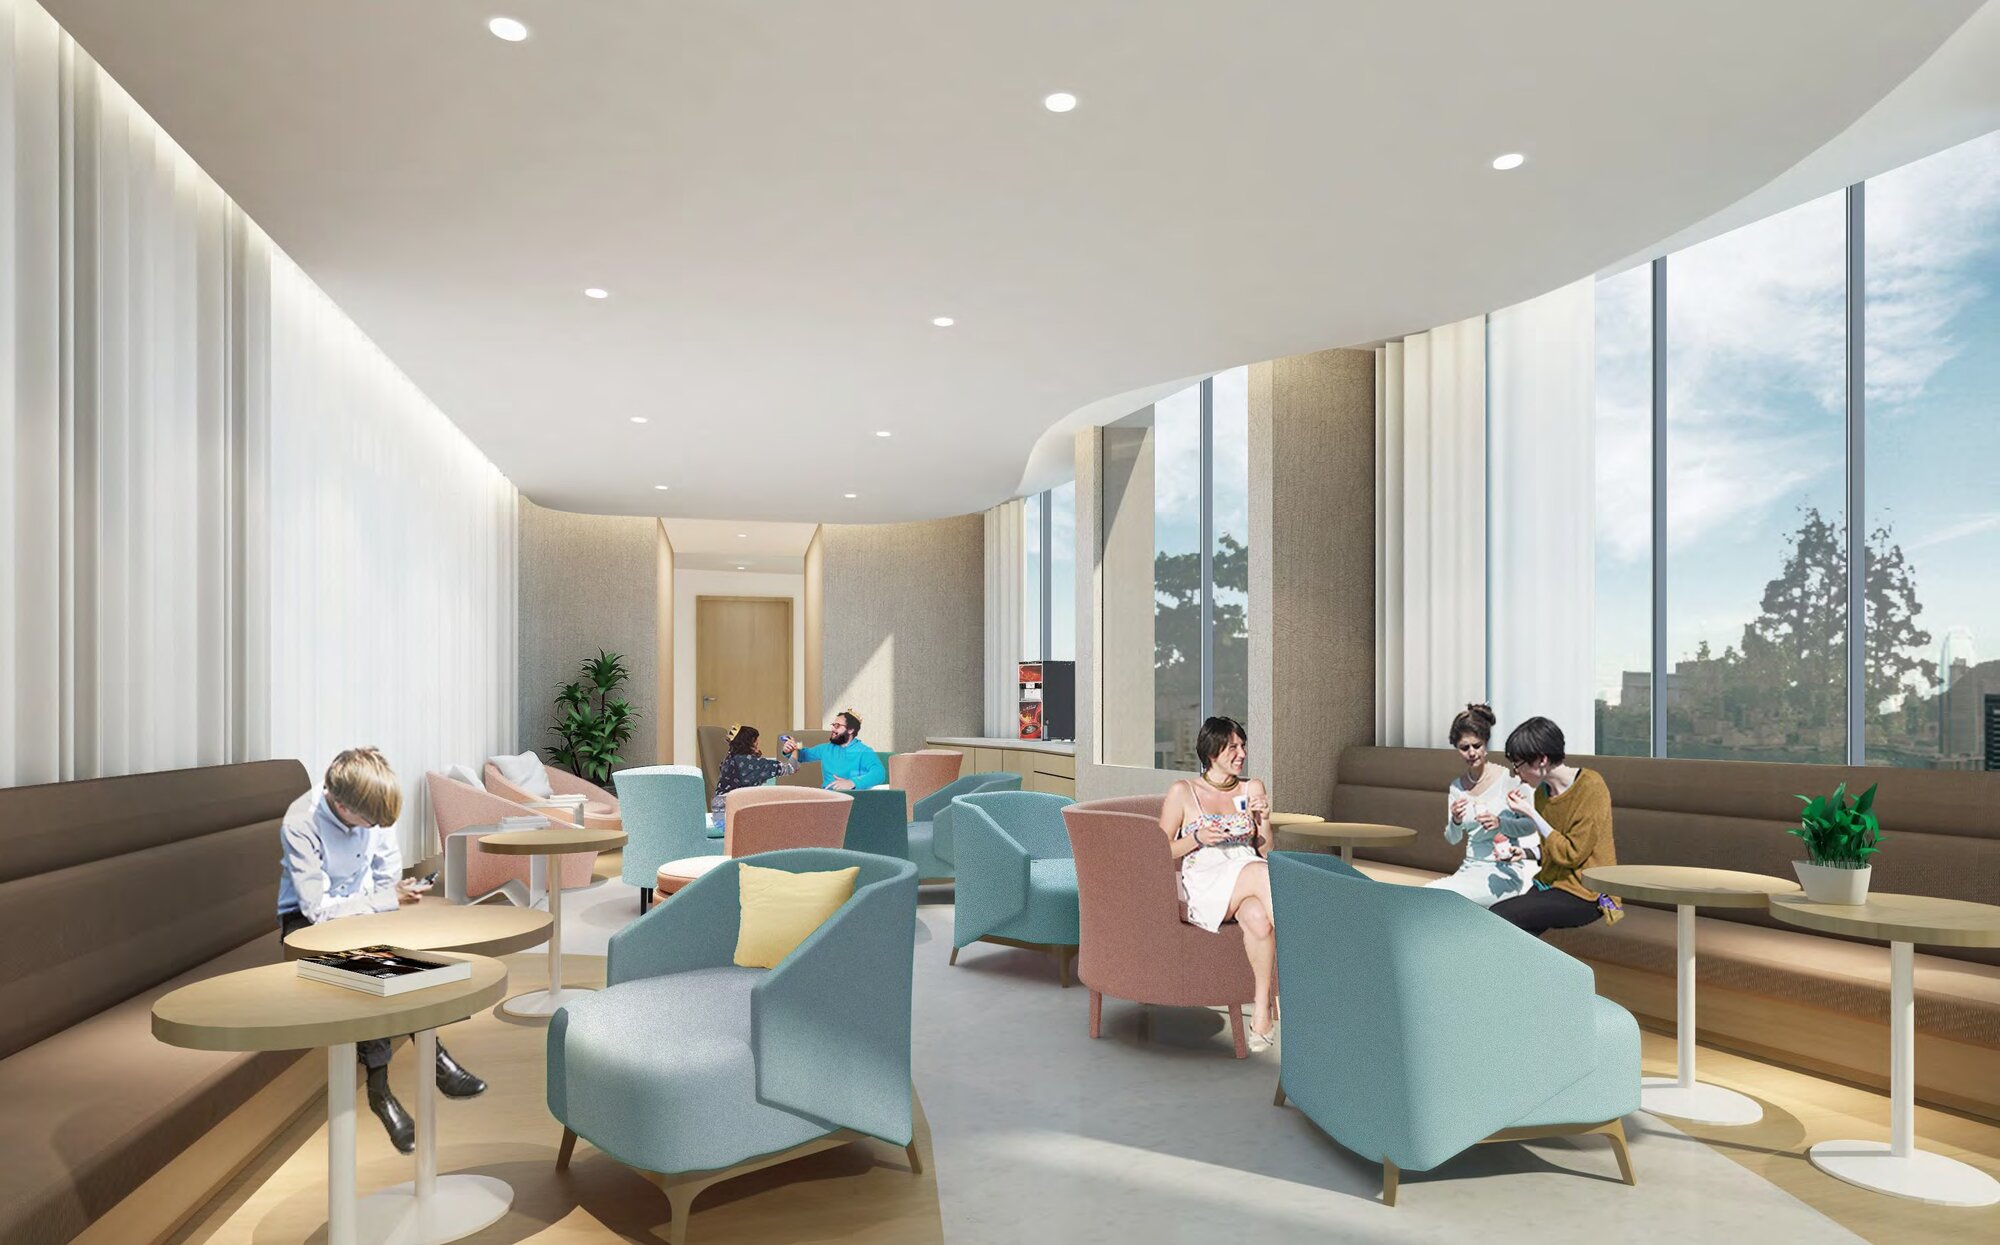 ▲Design of rest area in Huihe maternity and confinement center